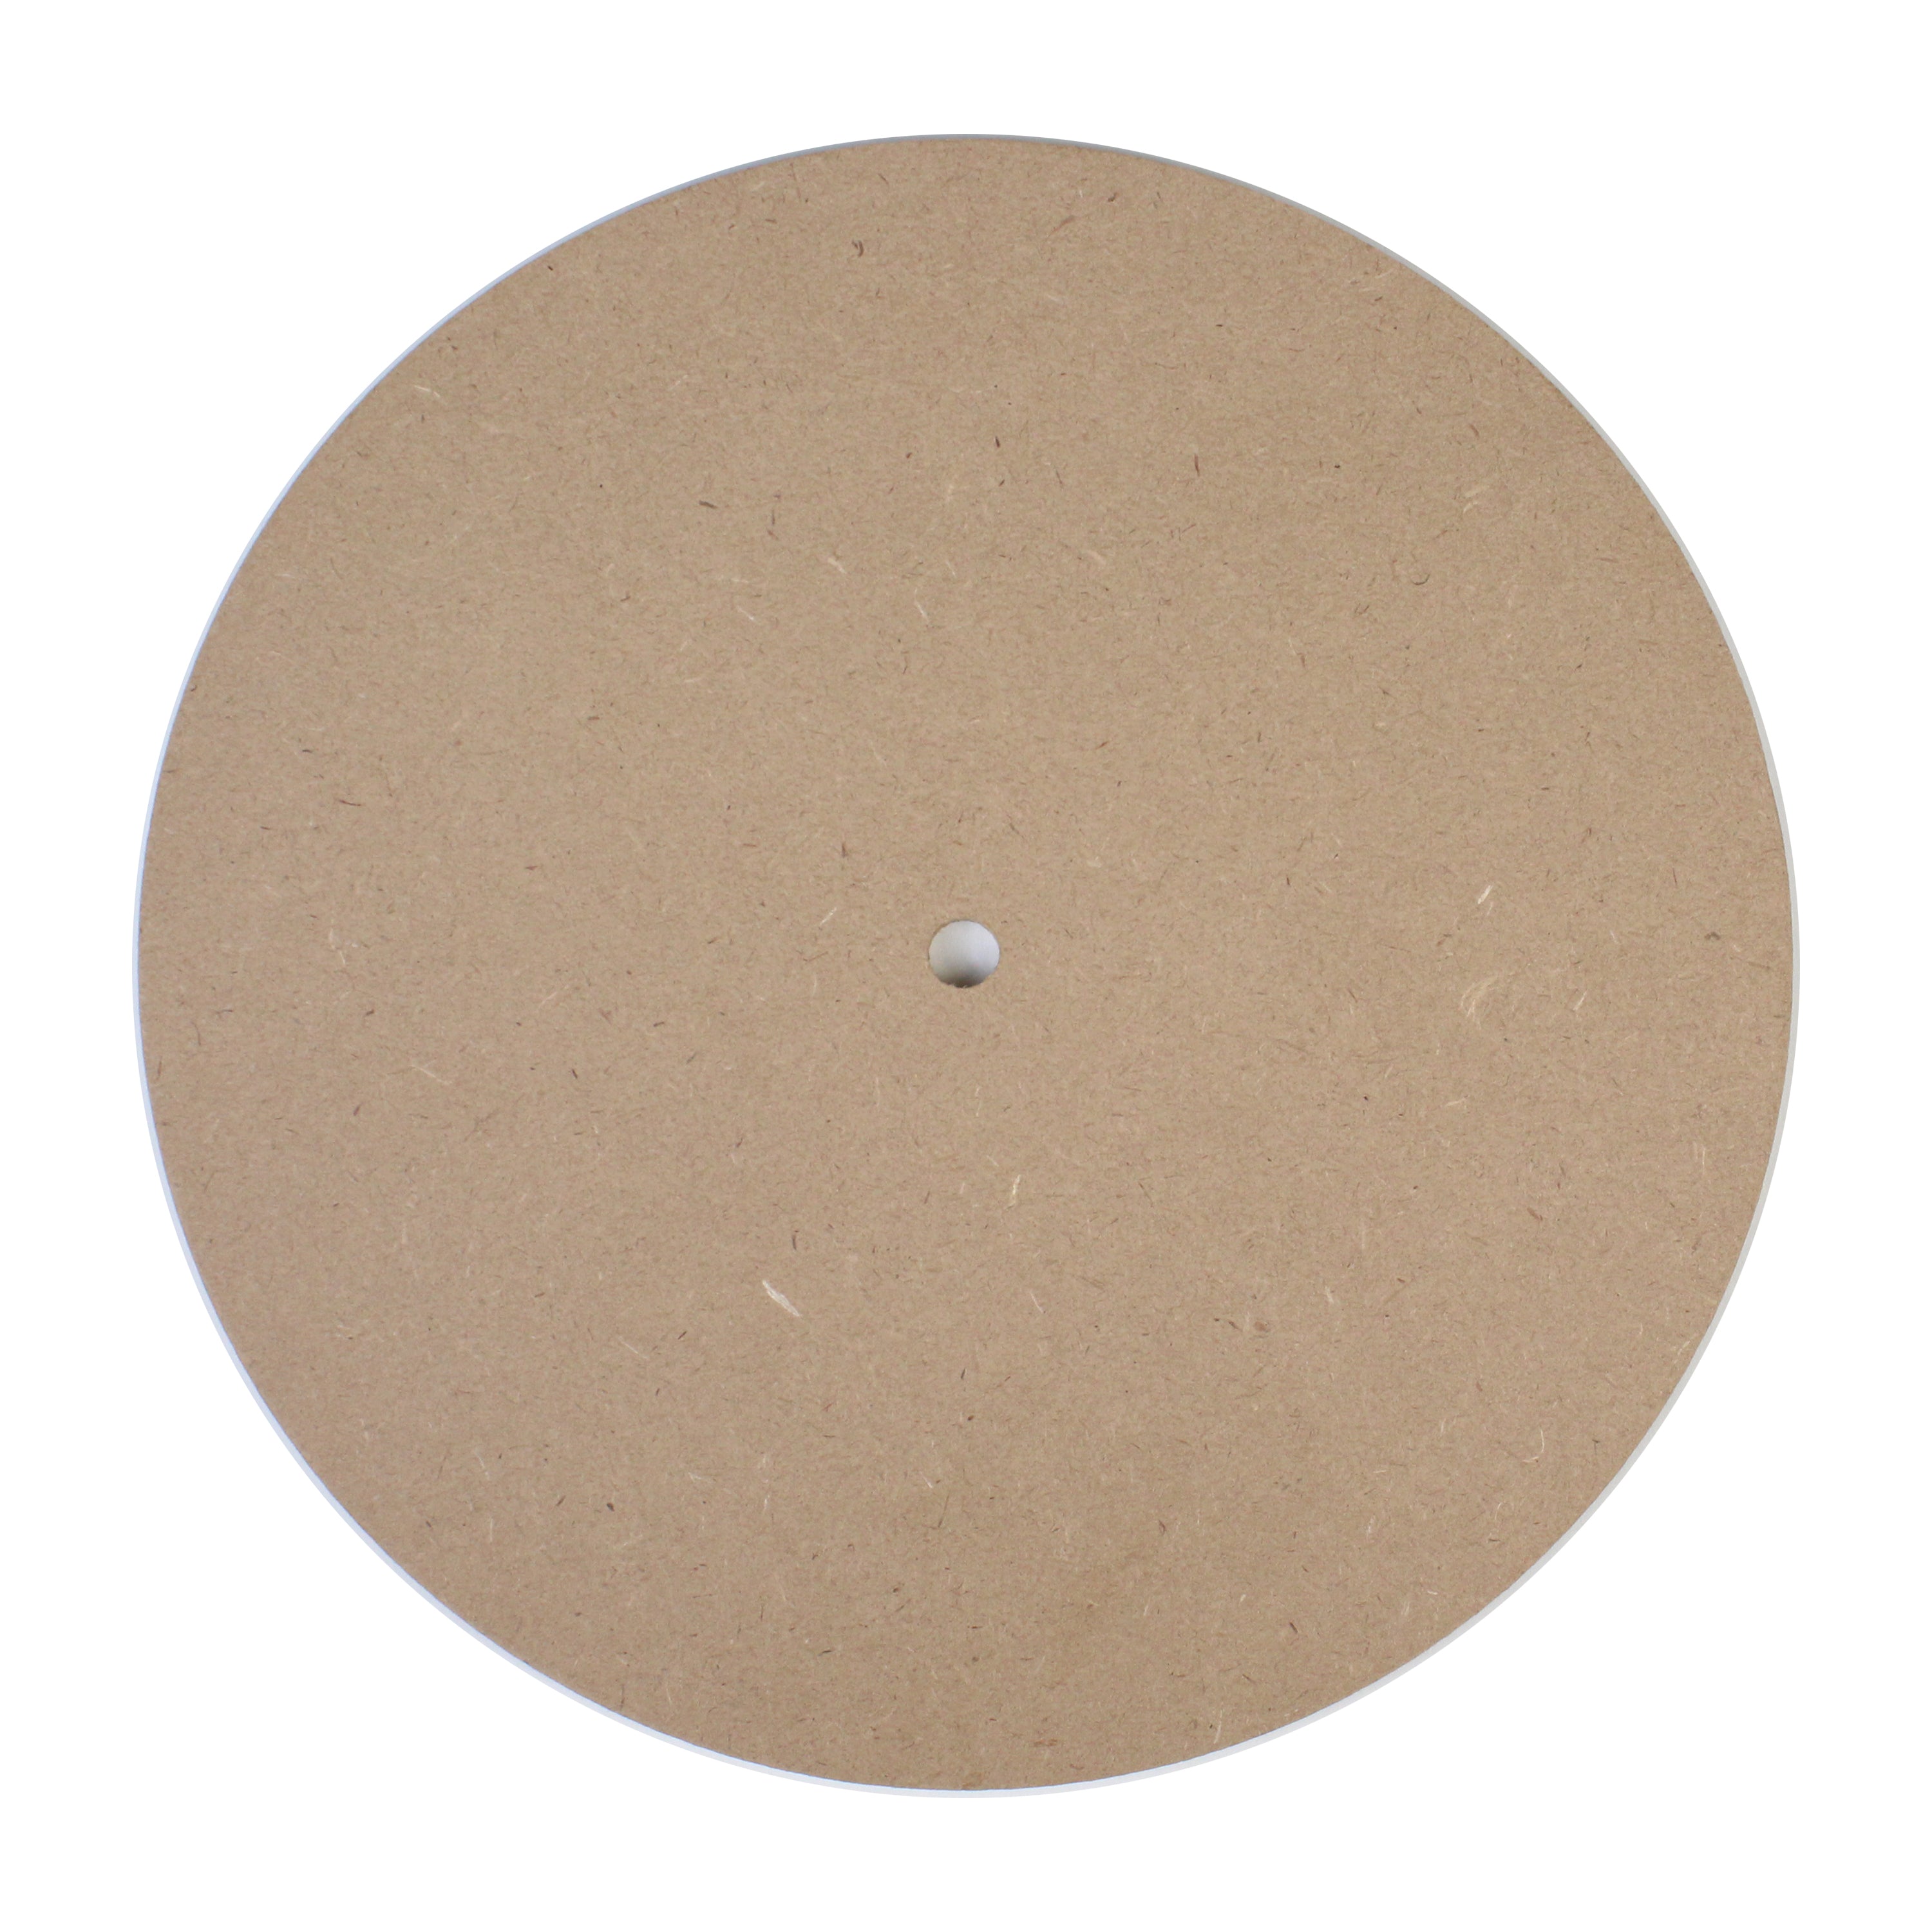 Mdf Clock Face 10Inch Dia 1.9Mm Thick 1Pc Lb